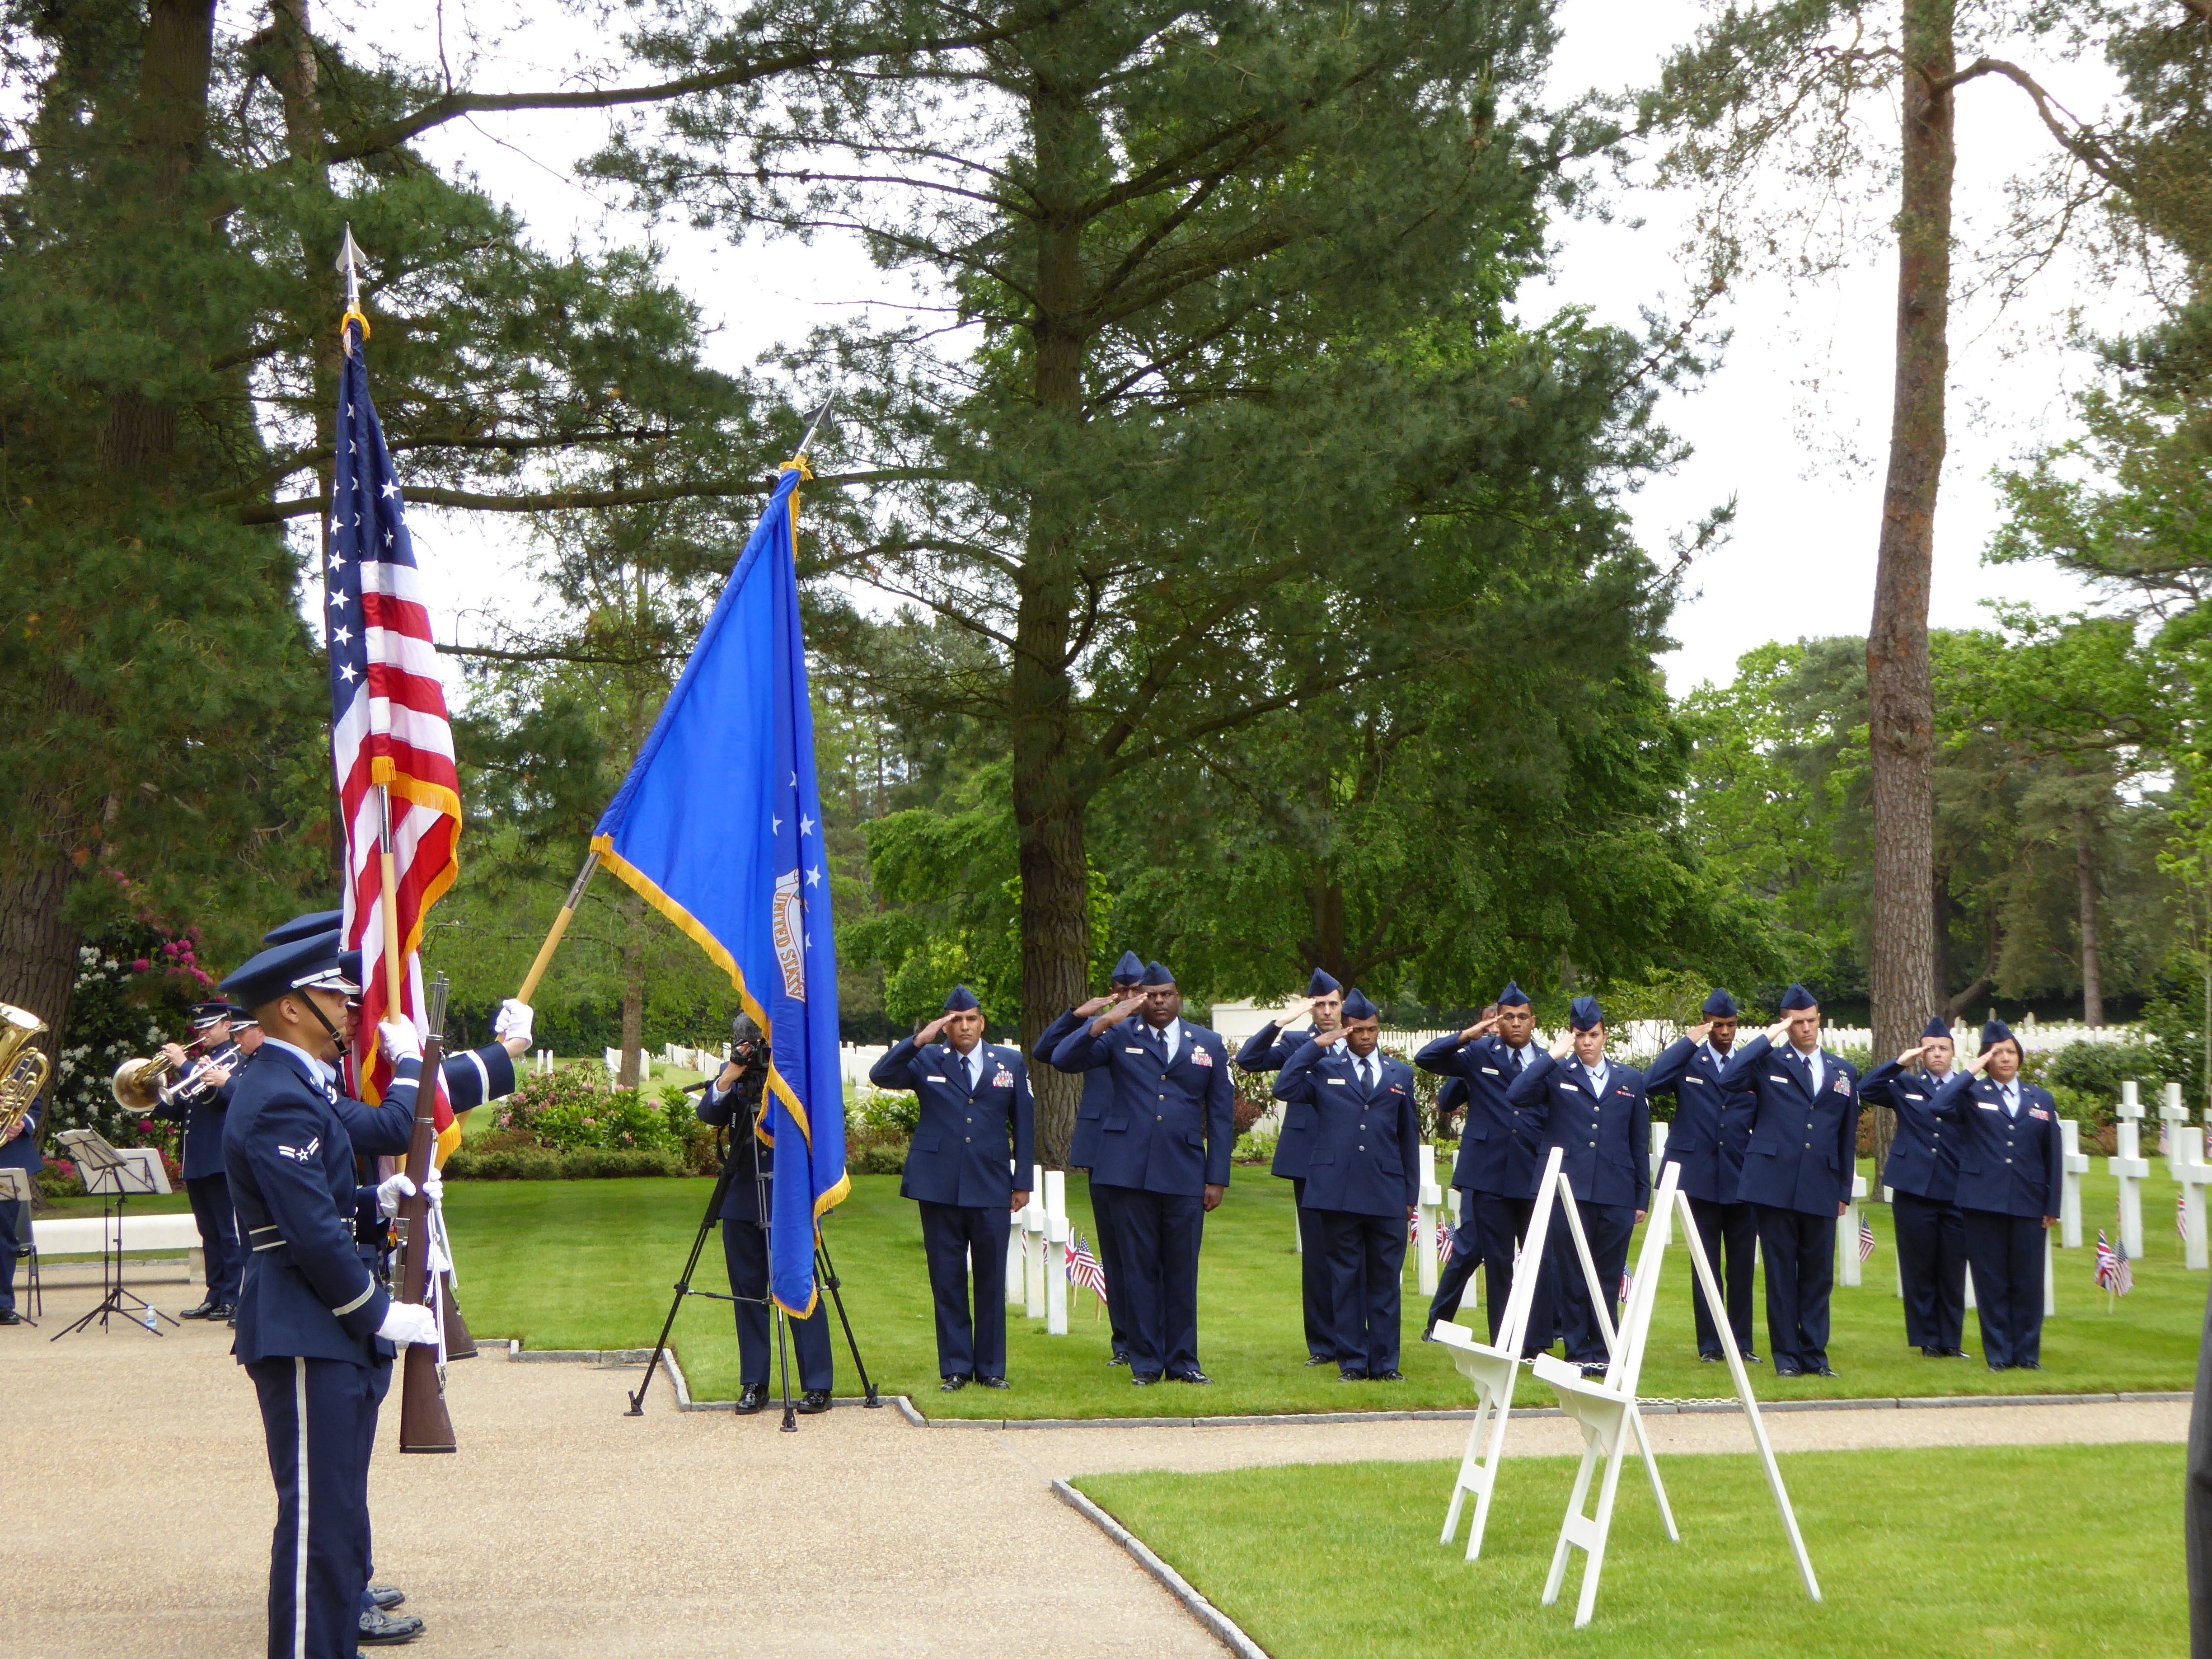 Airmen salute while the Color Guard posts the colors.